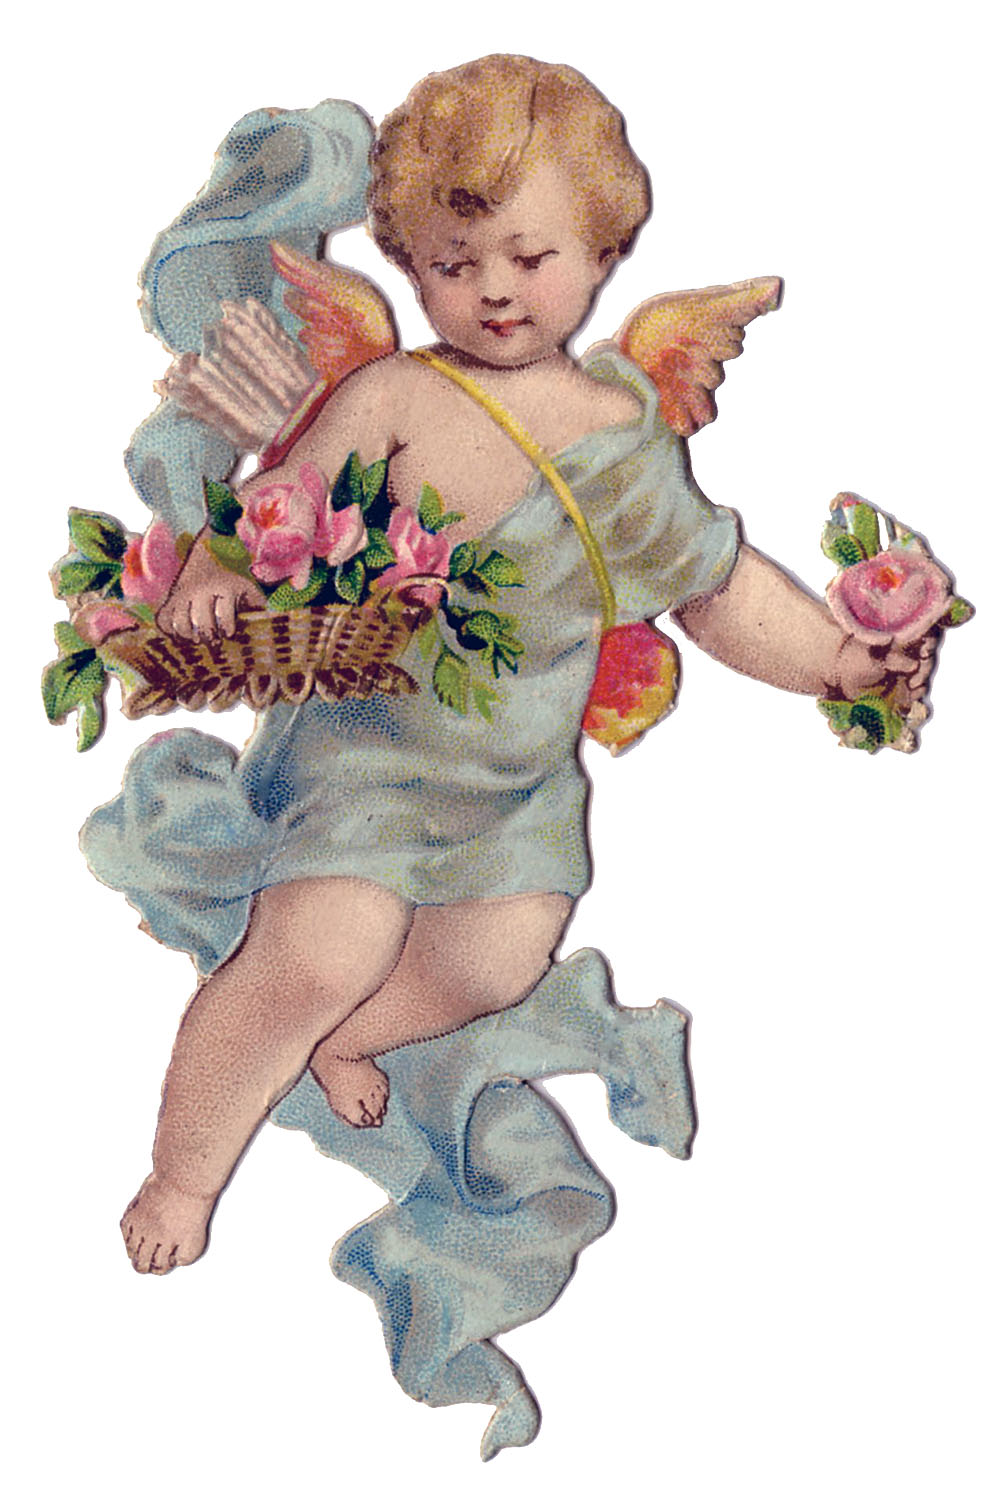 valentines day clipart cupid